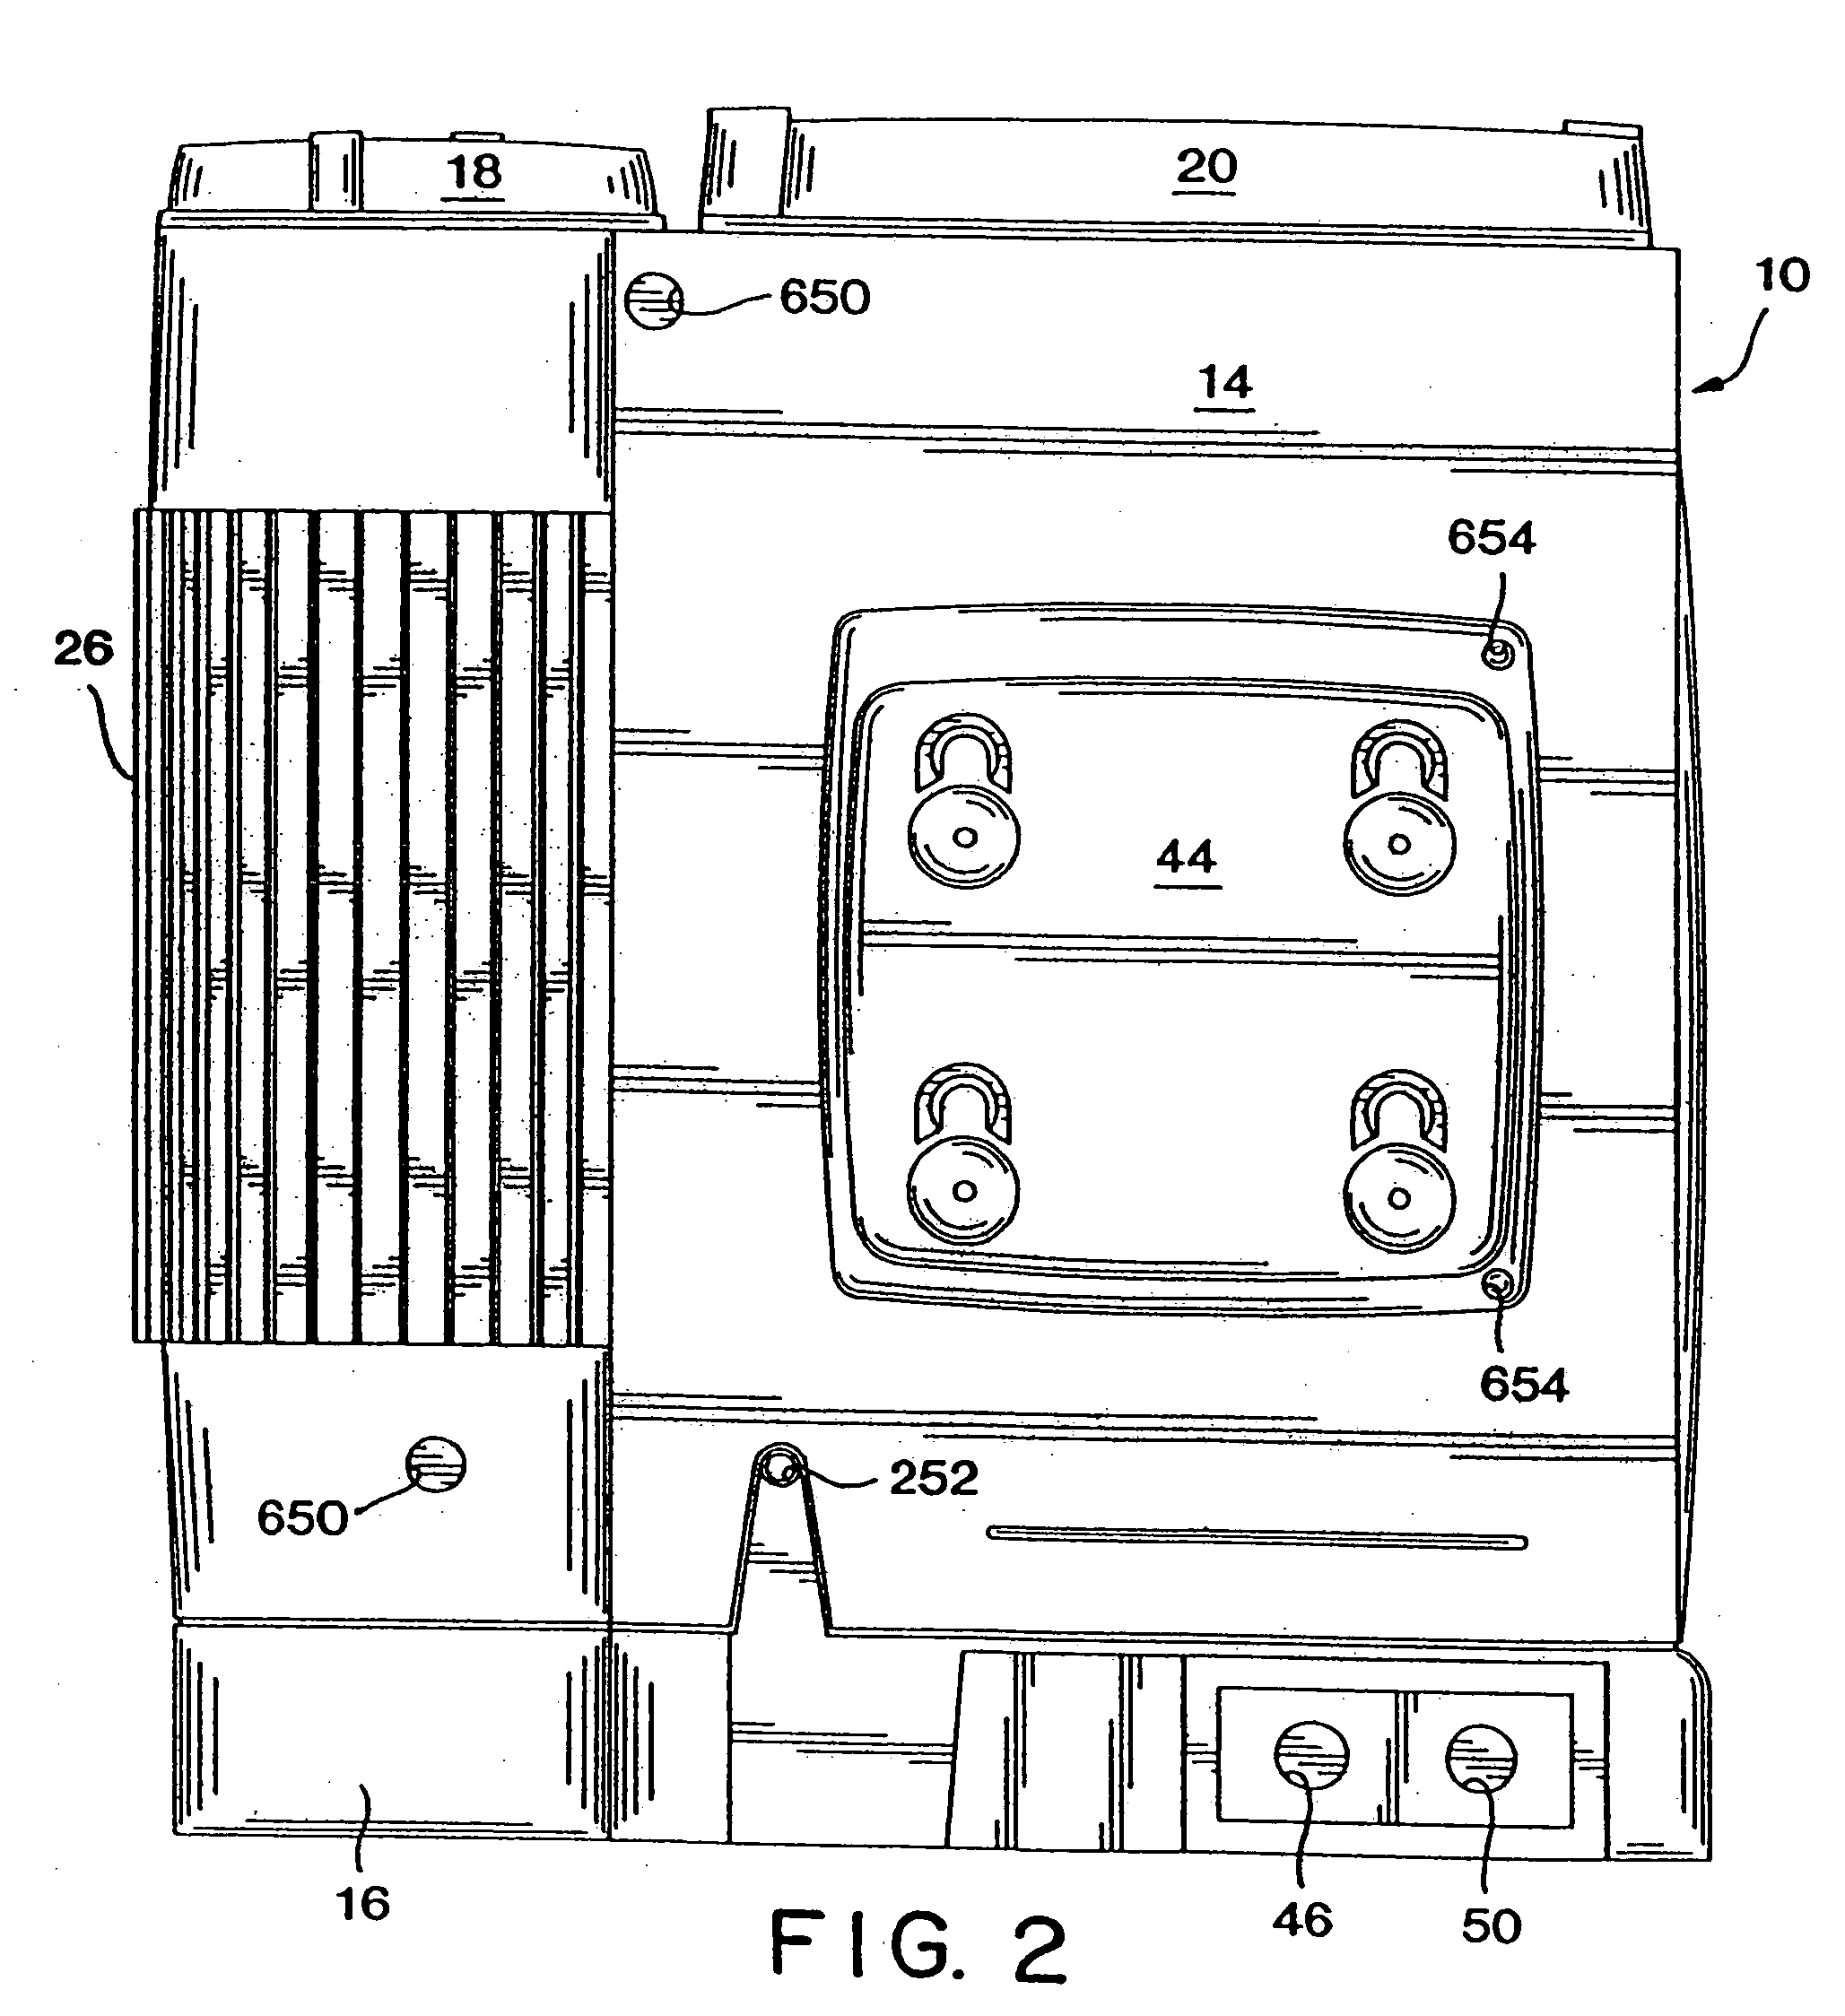 Point-of-use water treatment system